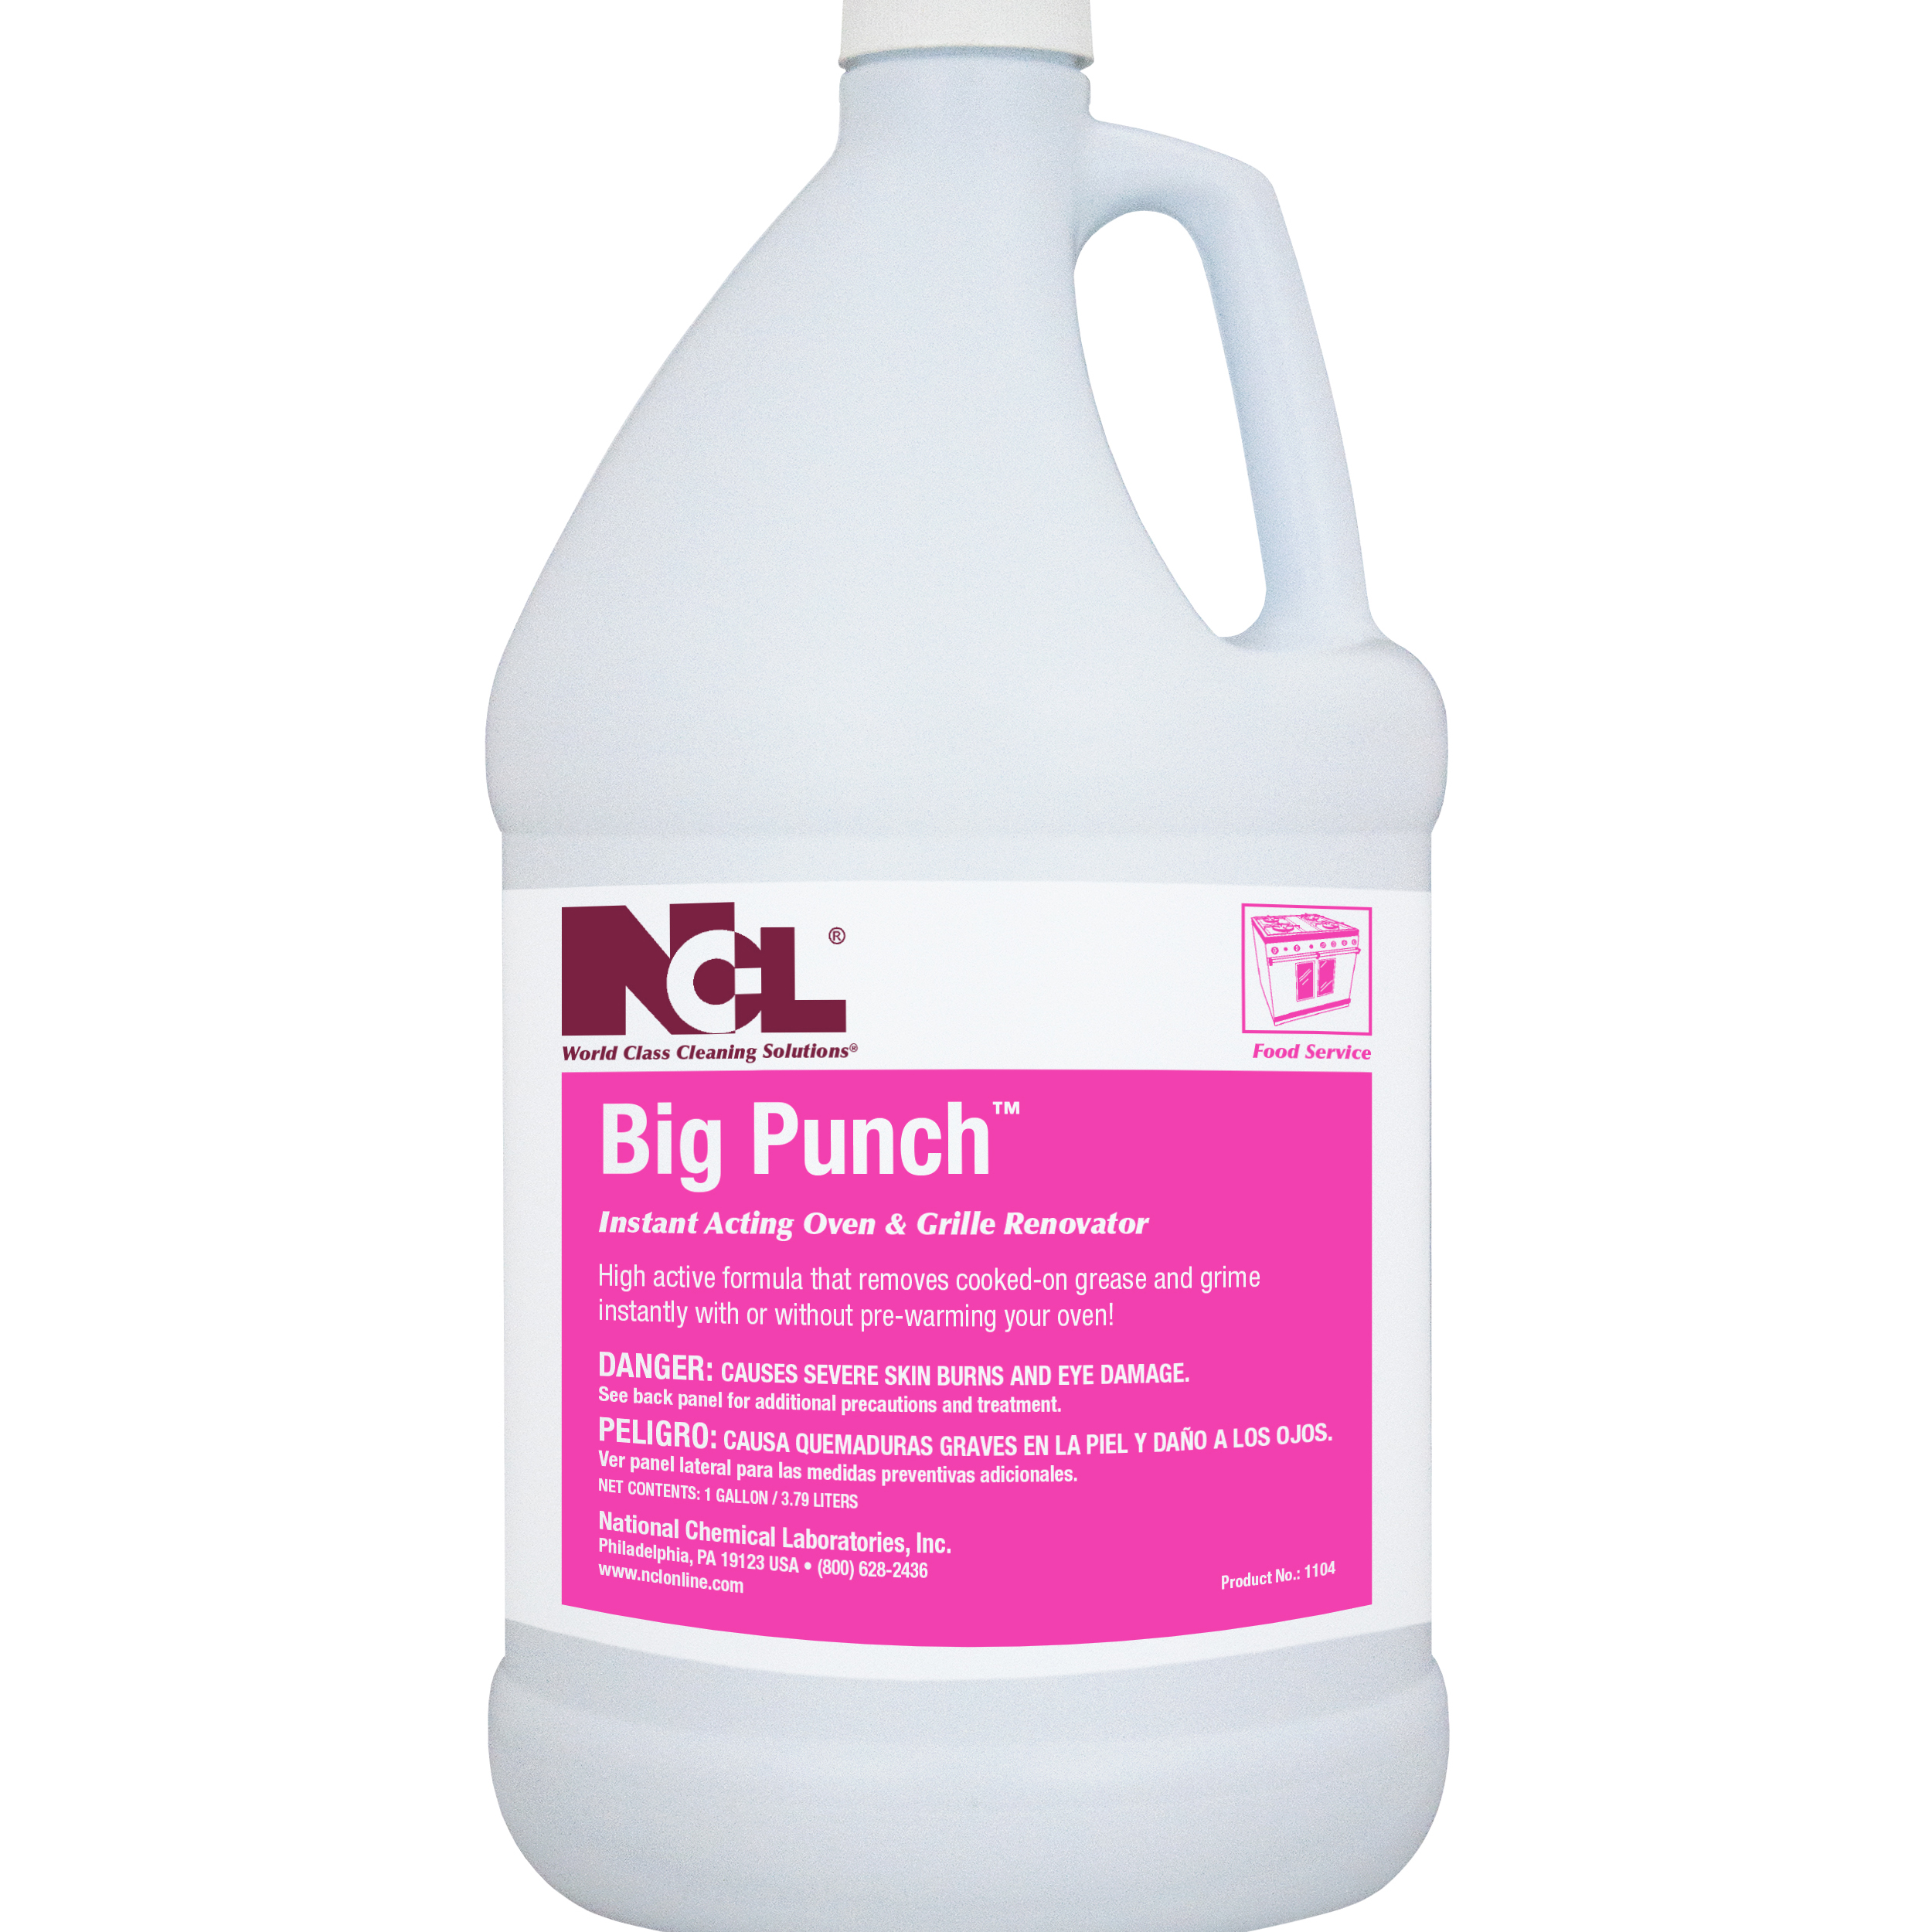  BIG PUNCH Cold Oven & Grille Cleaner 4/1 Gal. Case (NCL1104-28) 